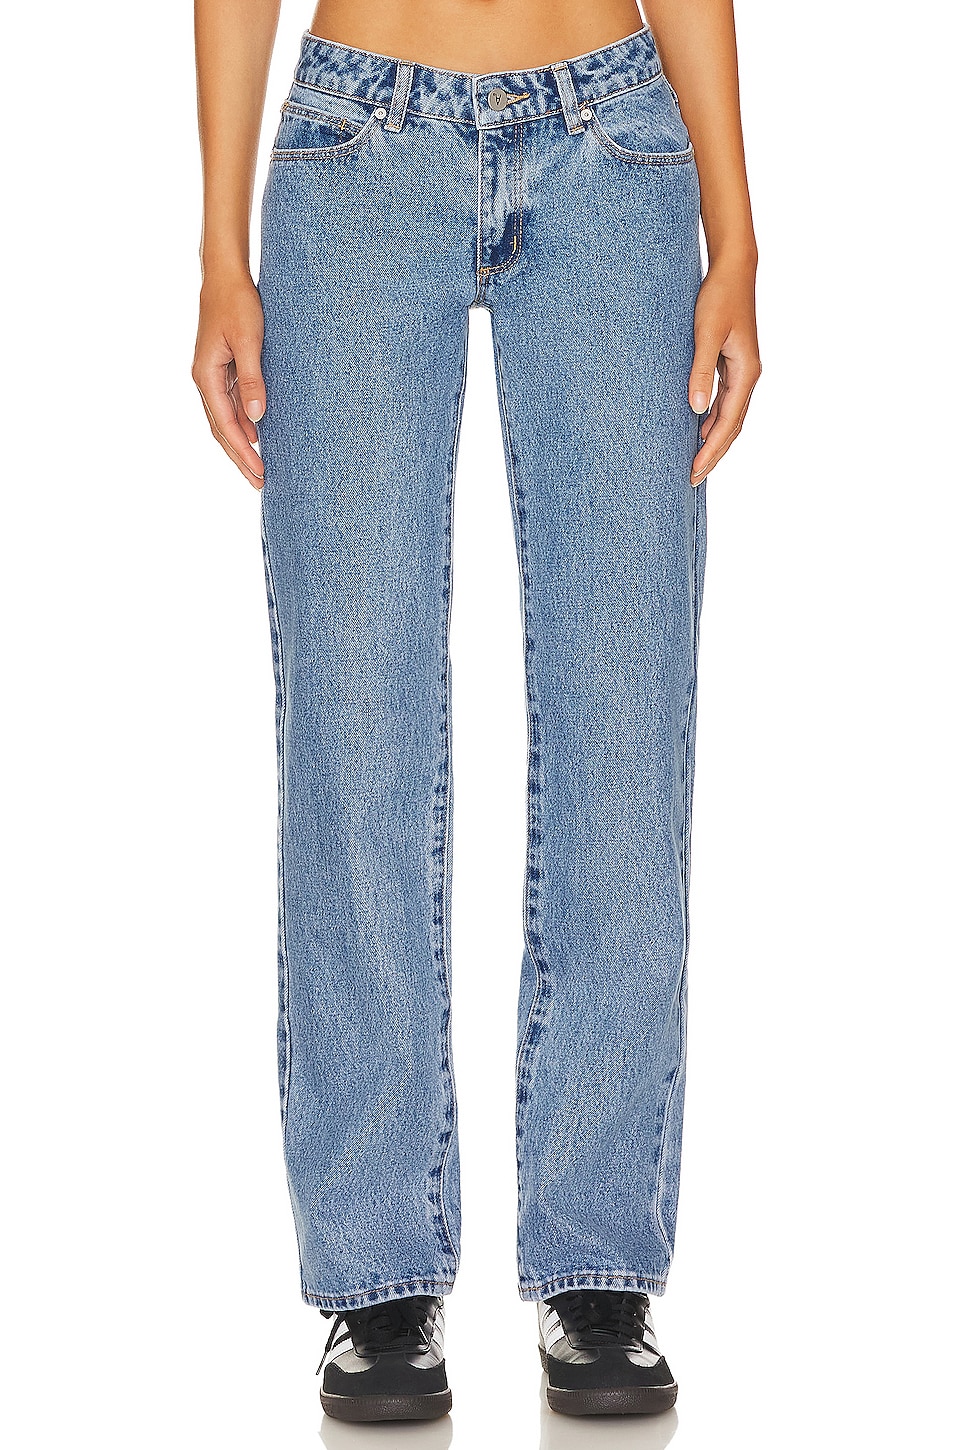 Abrand Low Rise Straight Jean in Katie | REVOLVE